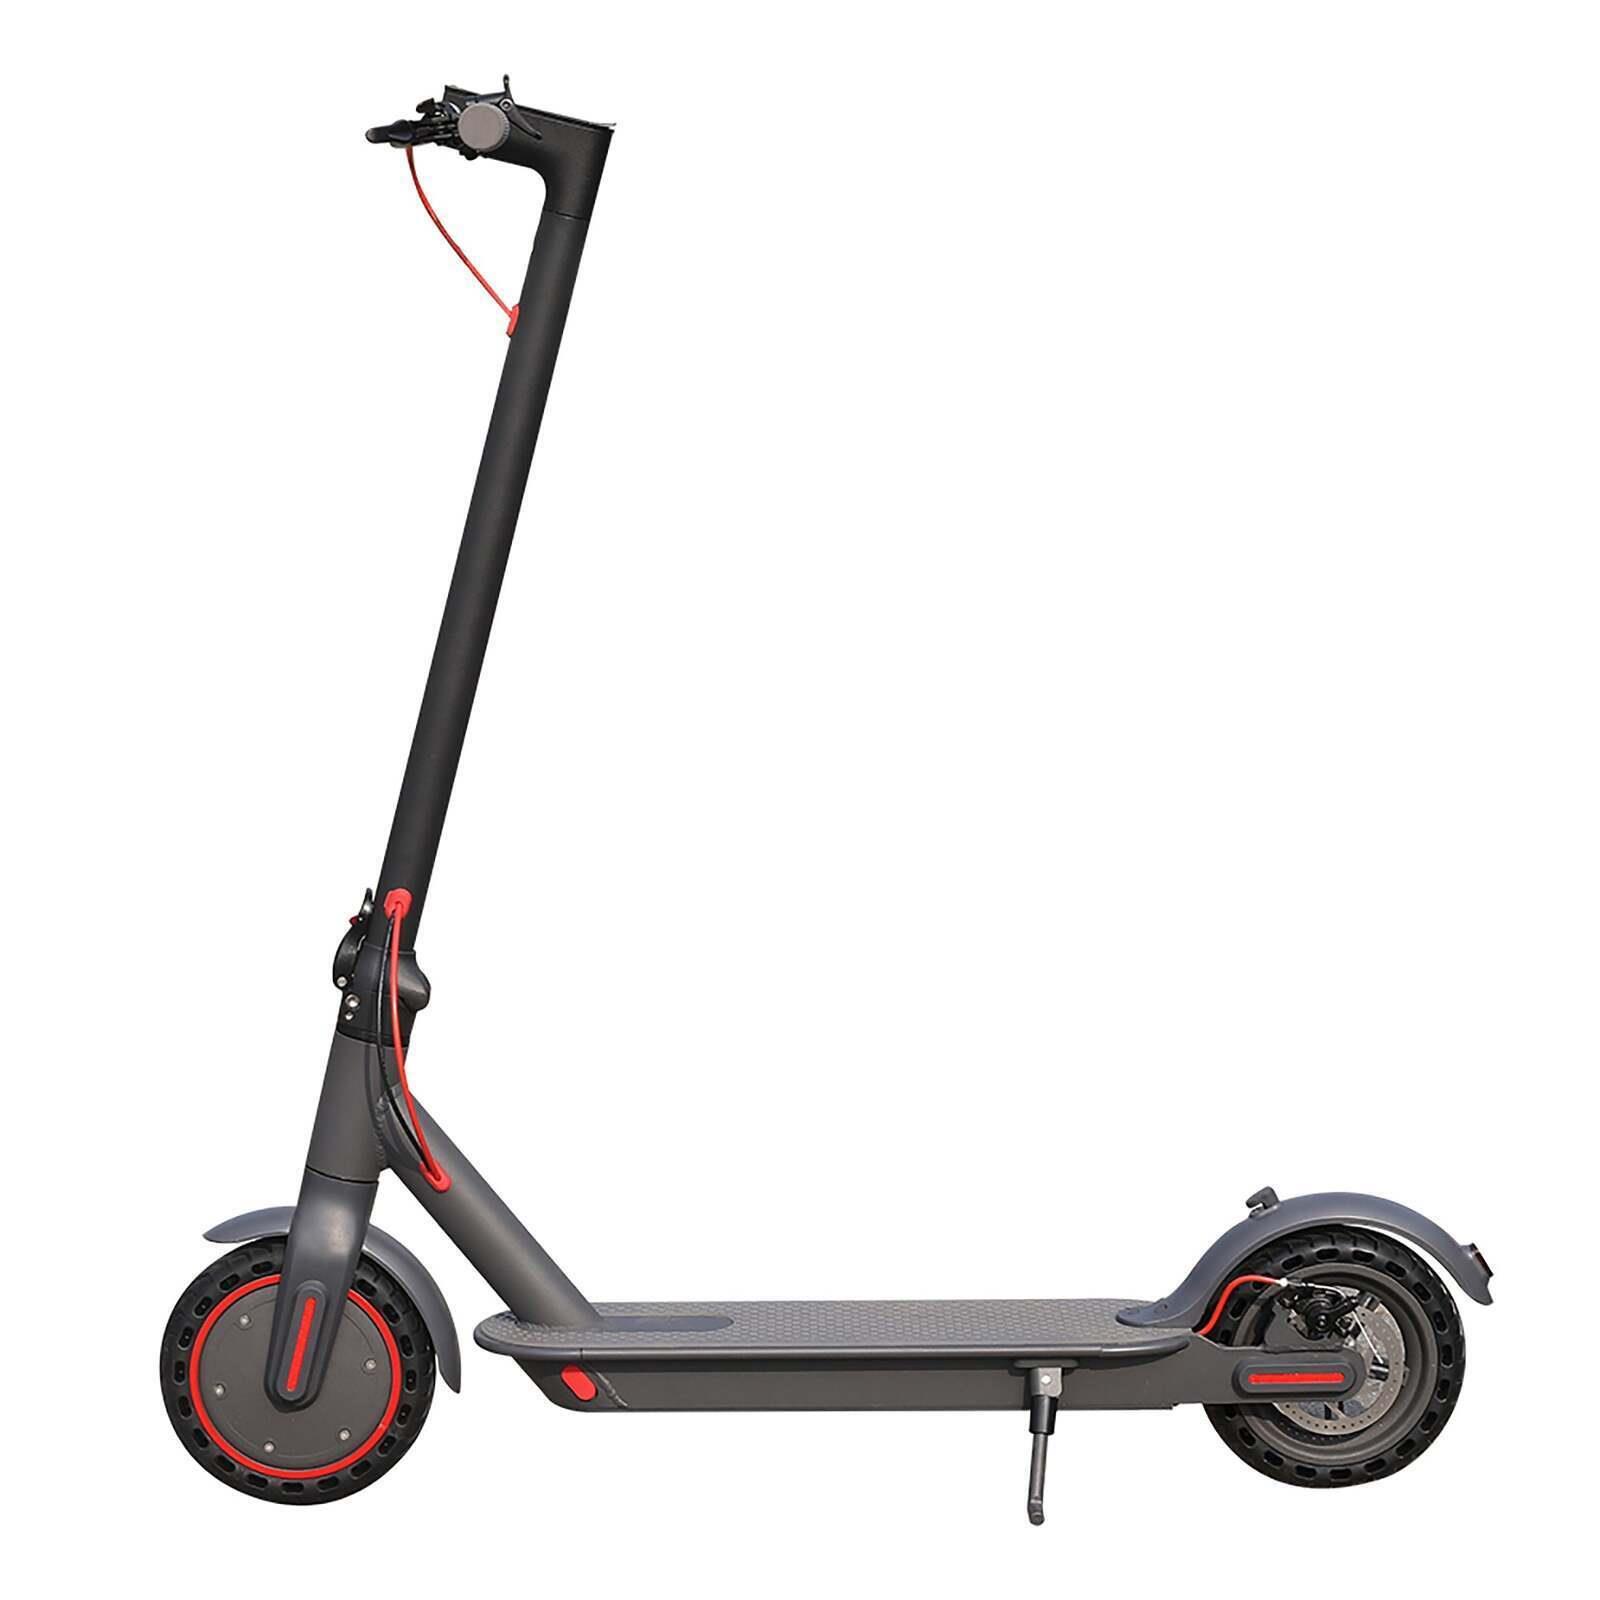 Lenoxx Folding Electric Scooter With A 36v 10.5ah Battery, Ride Up To